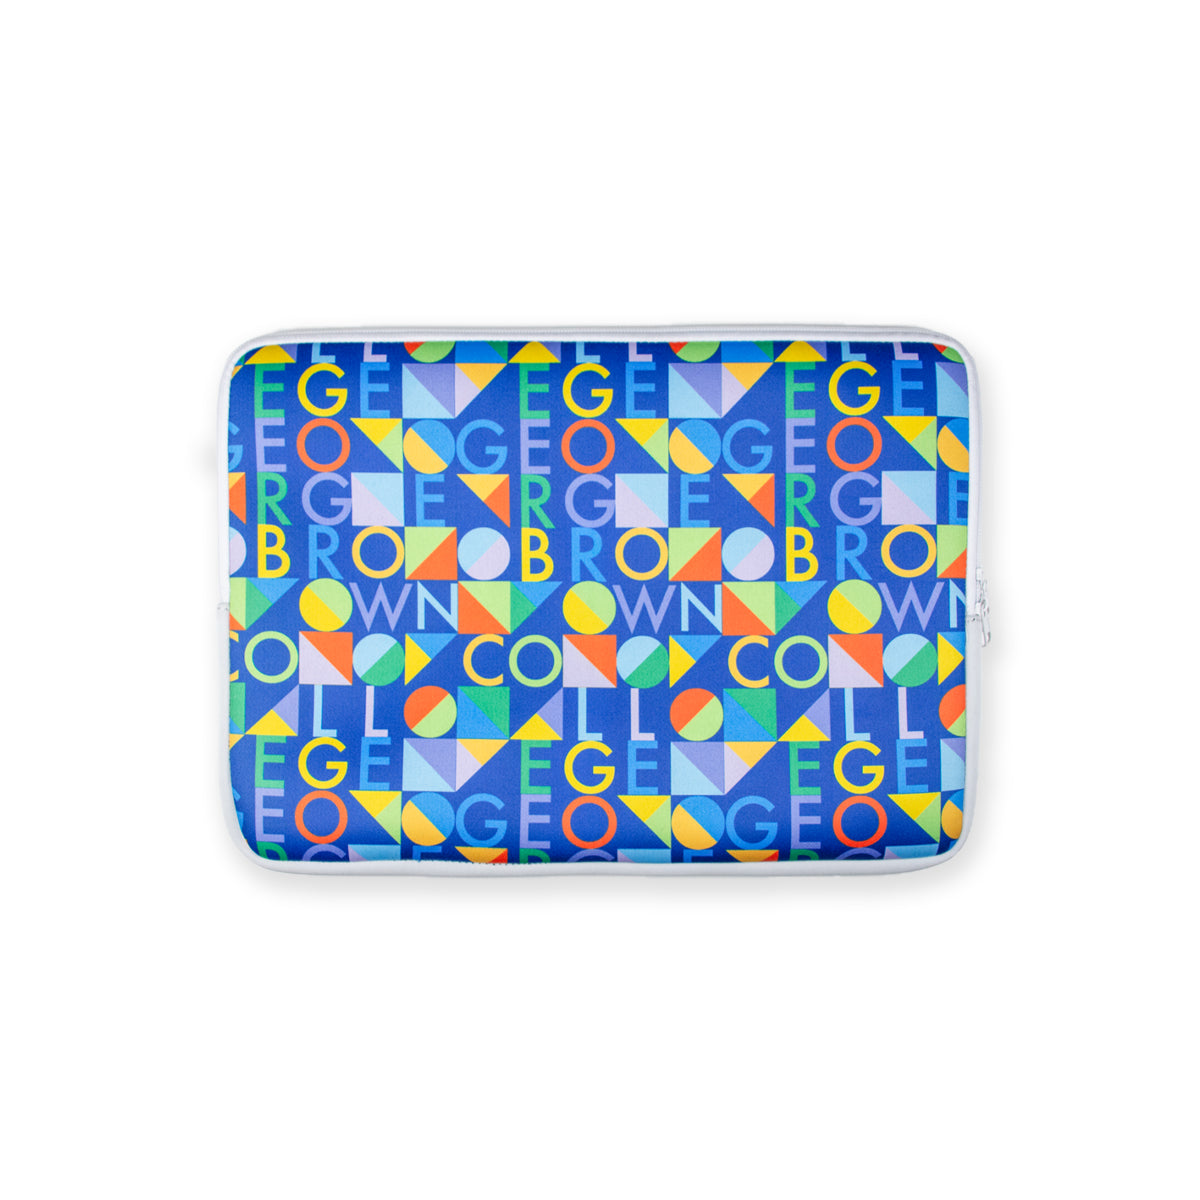 15" laptop sleeve in blue with multicoloured george brown college text and geometric shape pattern